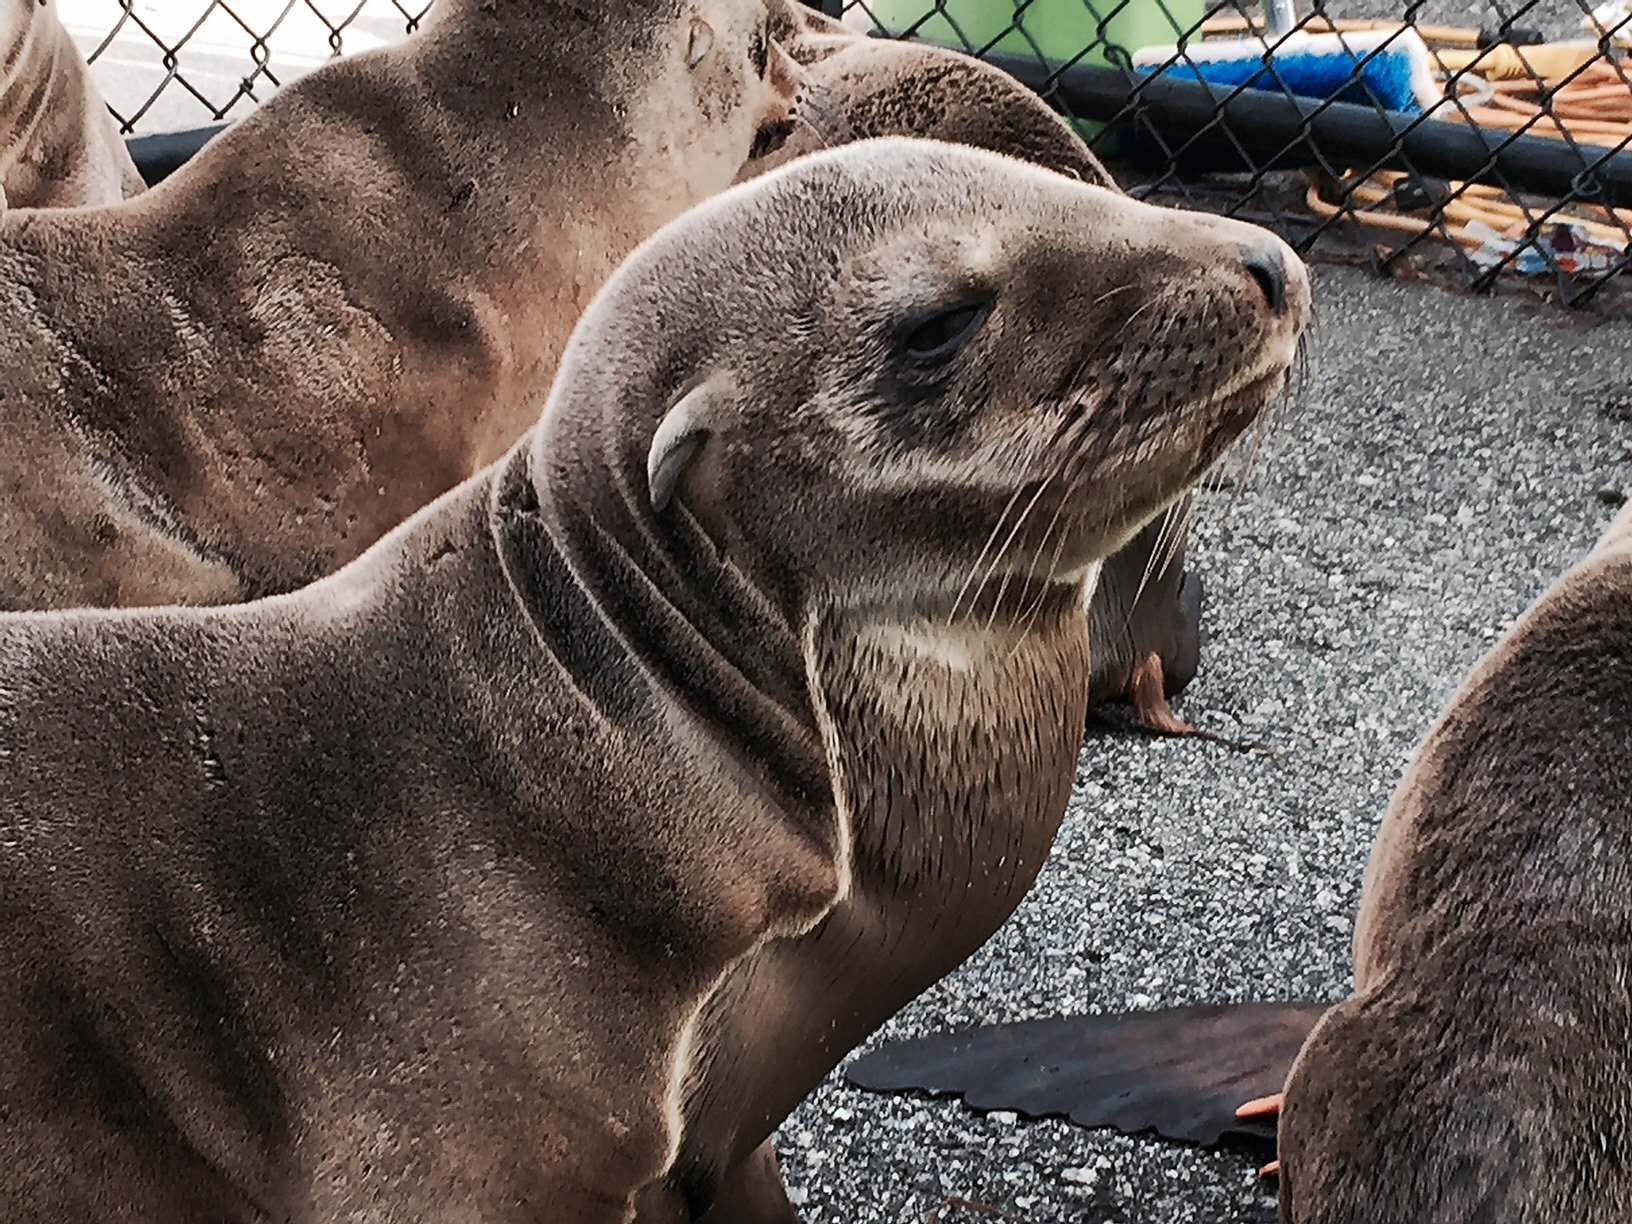 Young sea lion found on Skyline Boulevard in S.F. 